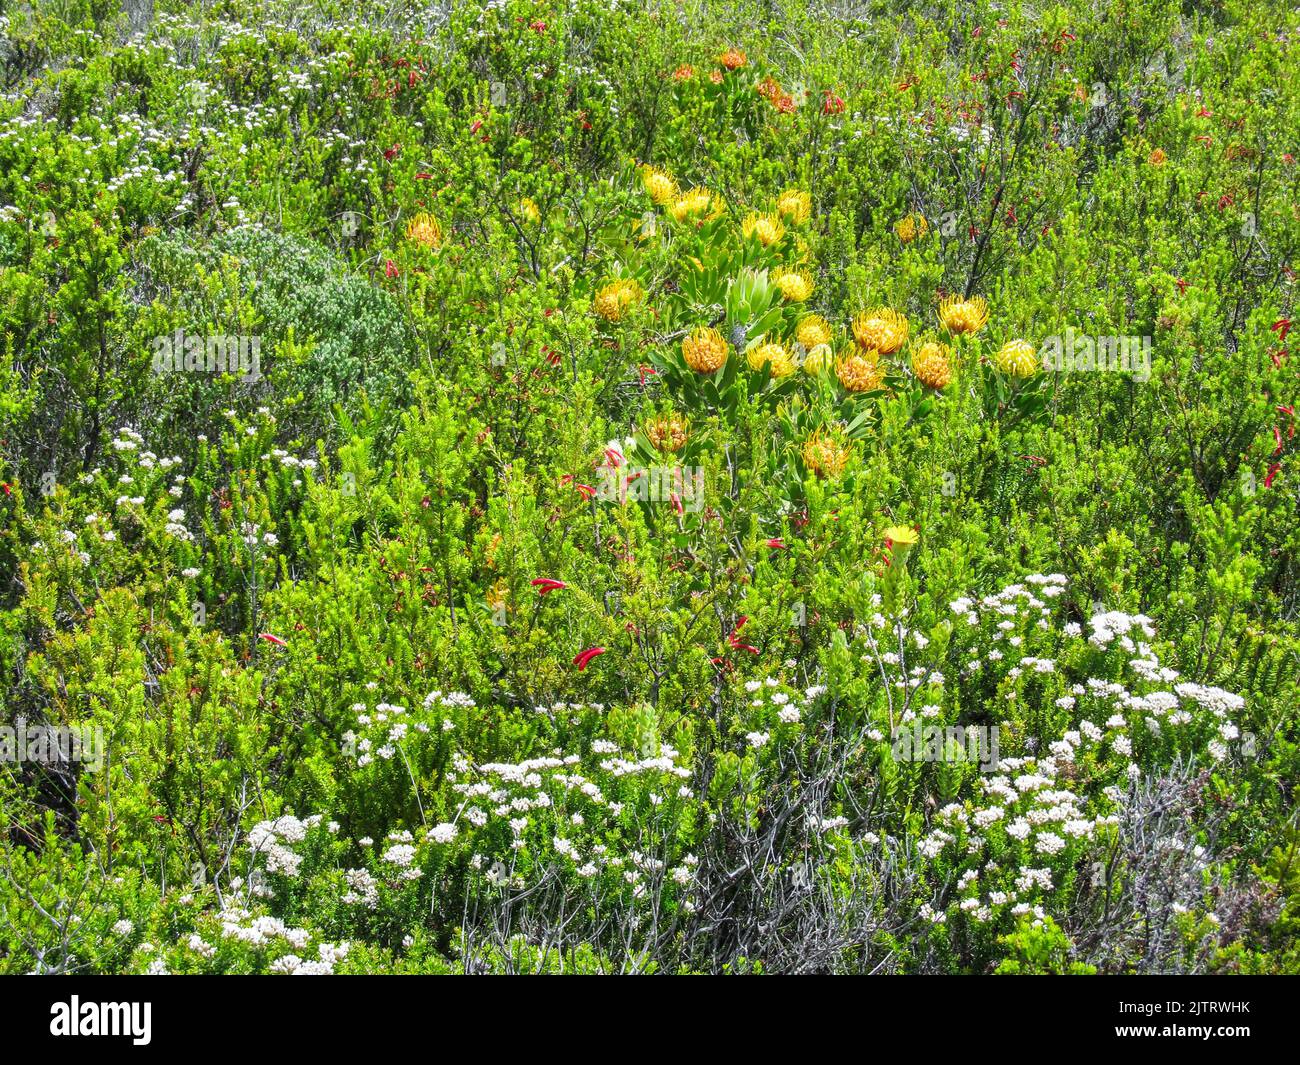 A mass of different flowering fynbos, including Proteas and Ericas, in the summertime on the cliffs of the Tsitsikamma Coast, South Africa. Stock Photo